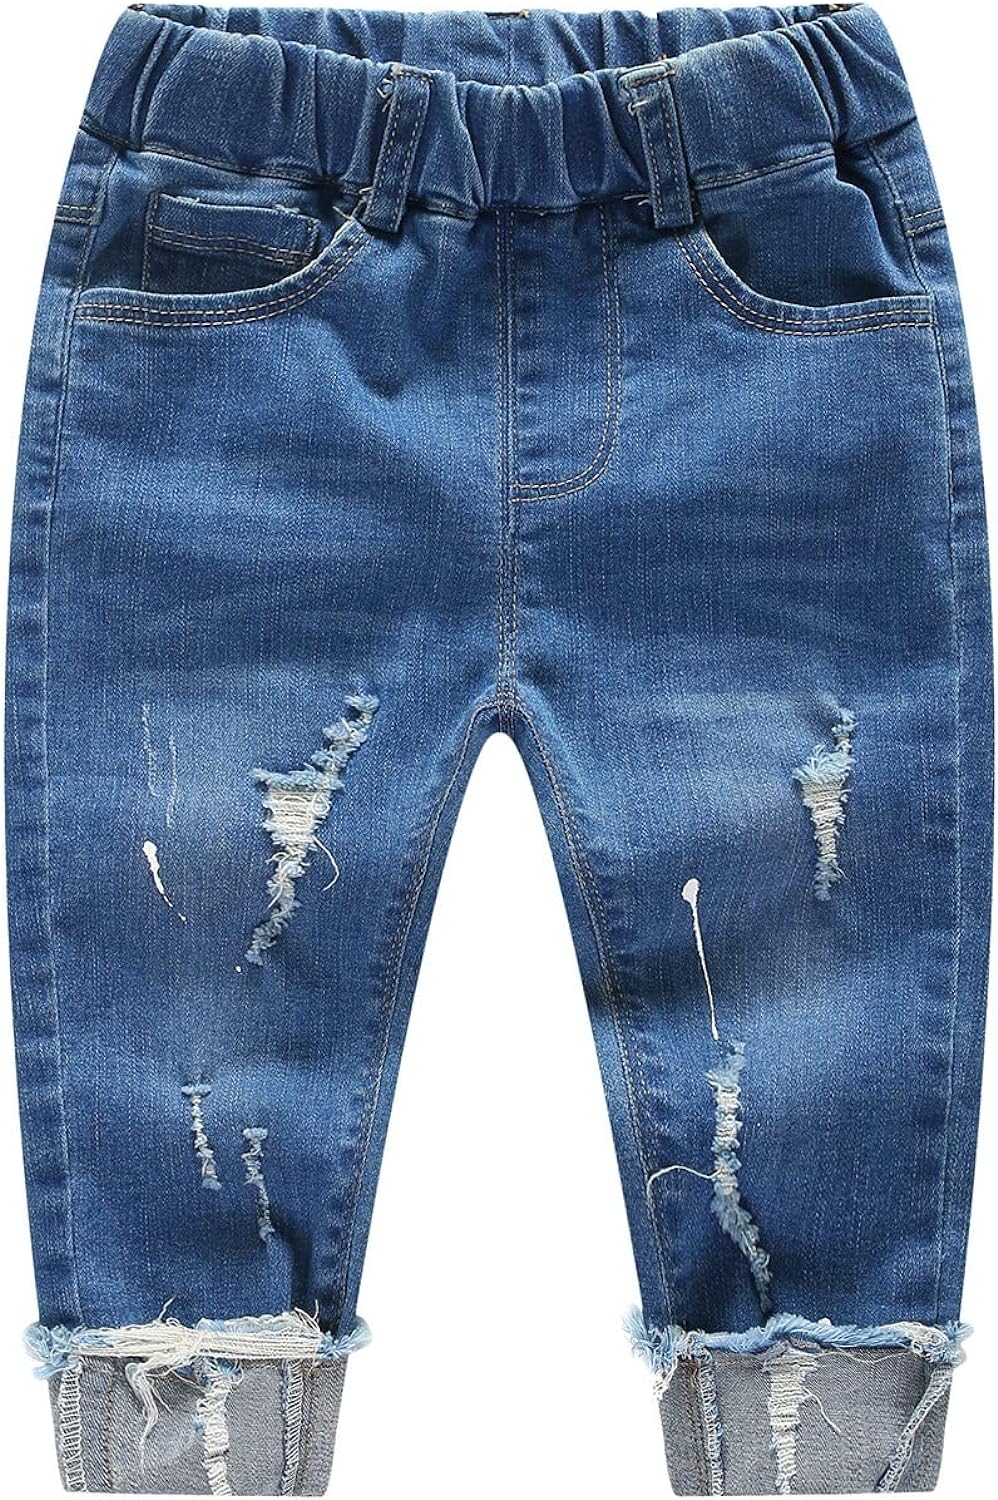 Boys jeans denim warm lined ribbed waist M S Baby 12 18 24 months 2 3 years 